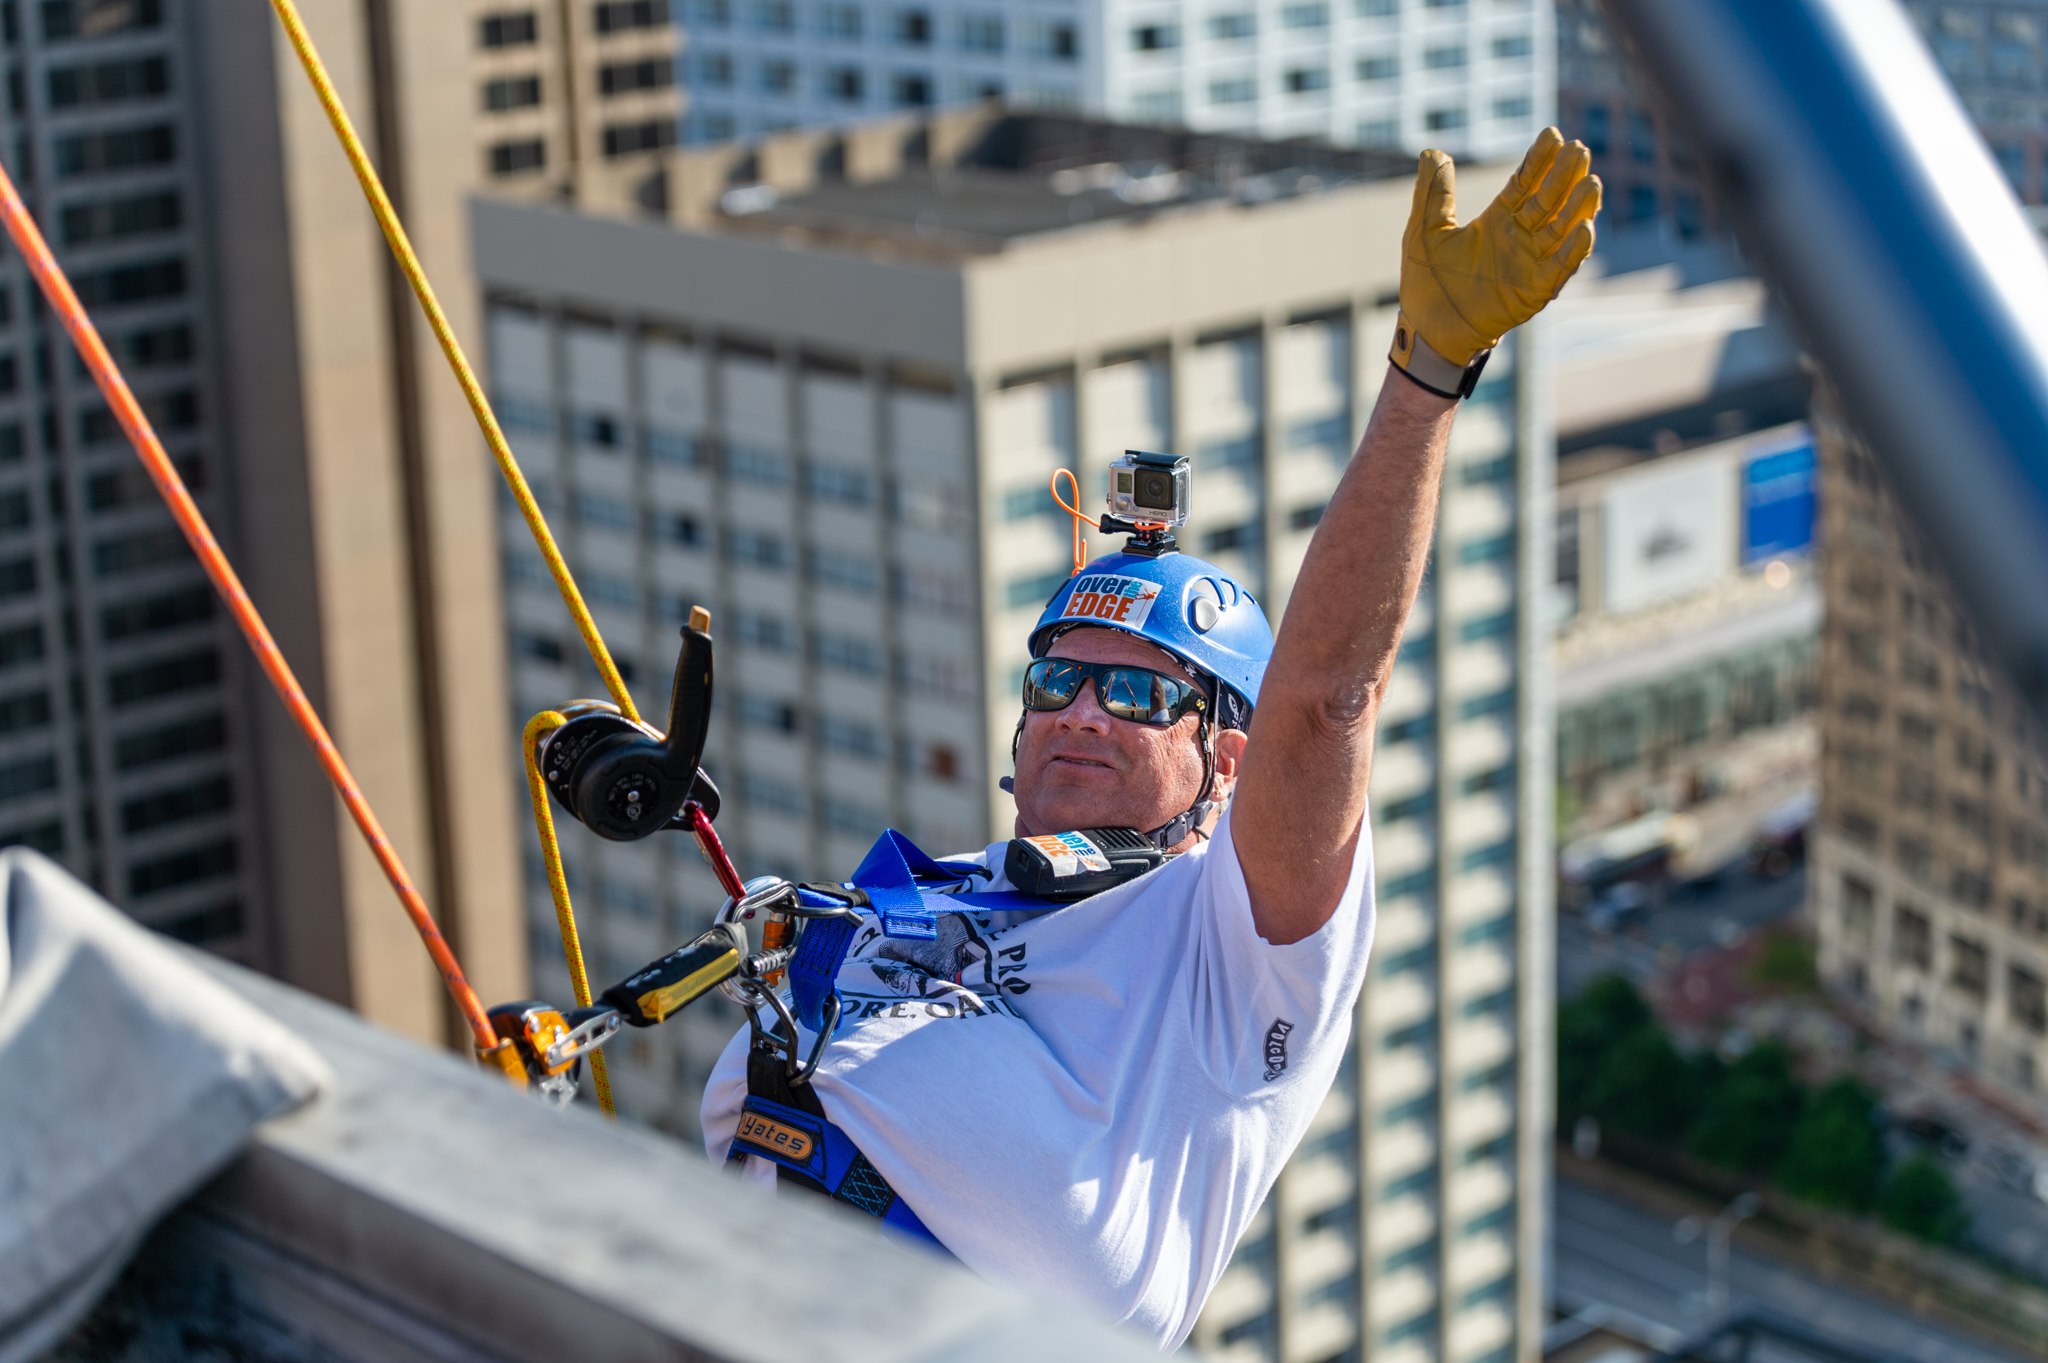 Baltimore, MD - Michael Gerlach of Catonsville begins a 25 story decent down the side of 100 N. Charles Street on Friday June 14, 2019 during the 10th Annual Rappel for Kidney Health event. Gerlach is Executive Producer and Host of ÒInsight on DisabilityÓ radio show on WCBM talk radio AM 680. This is his fifth year going over the edge for the Rappel for Kidney Health event.